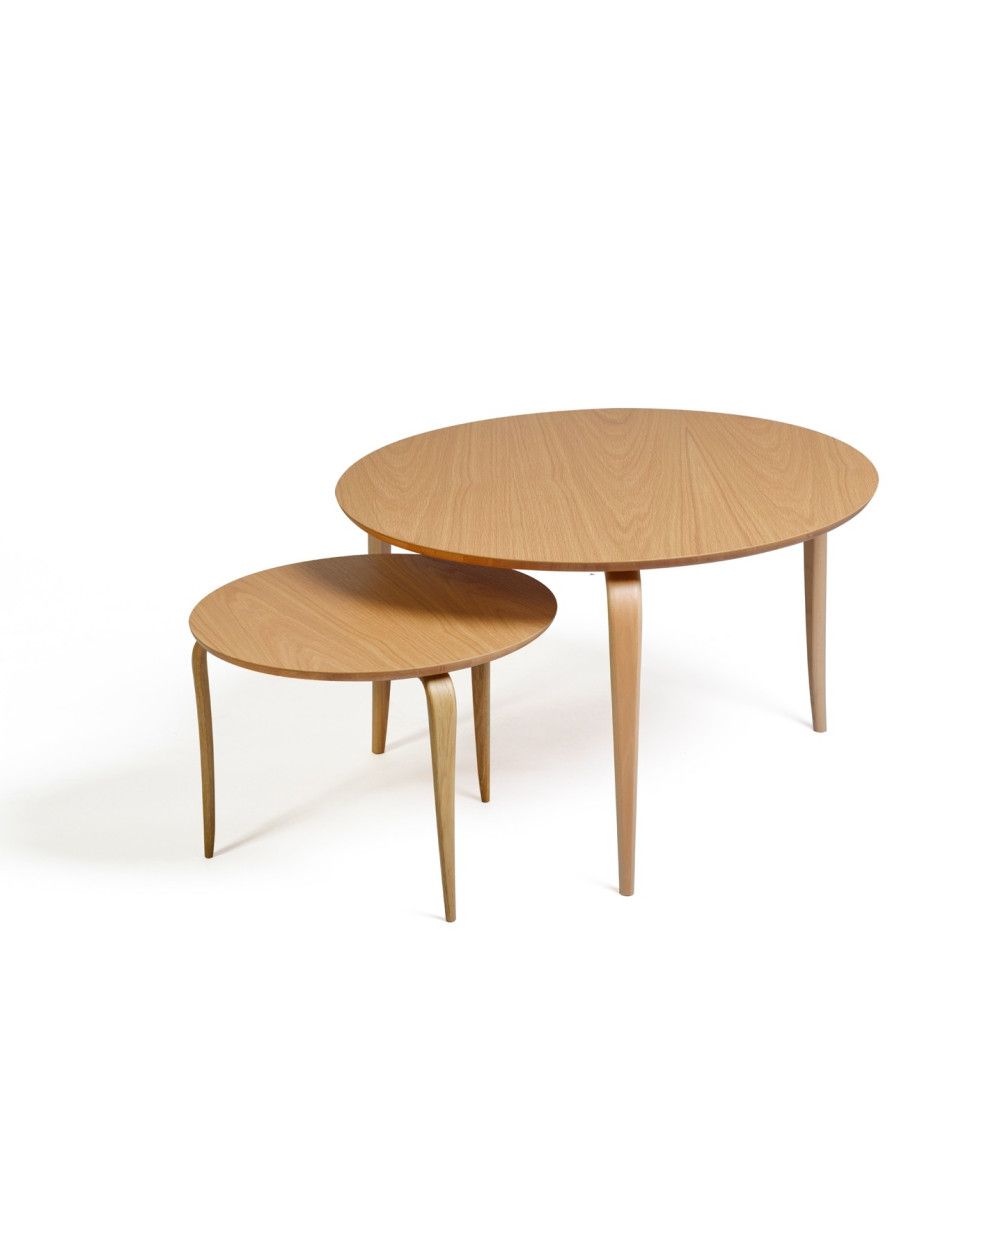 Simple Design Coffee Tables Pertaining To Popular Annika Coffee Table, Bruno Mathsson Design, La Boutique Danoise (View 10 of 10)